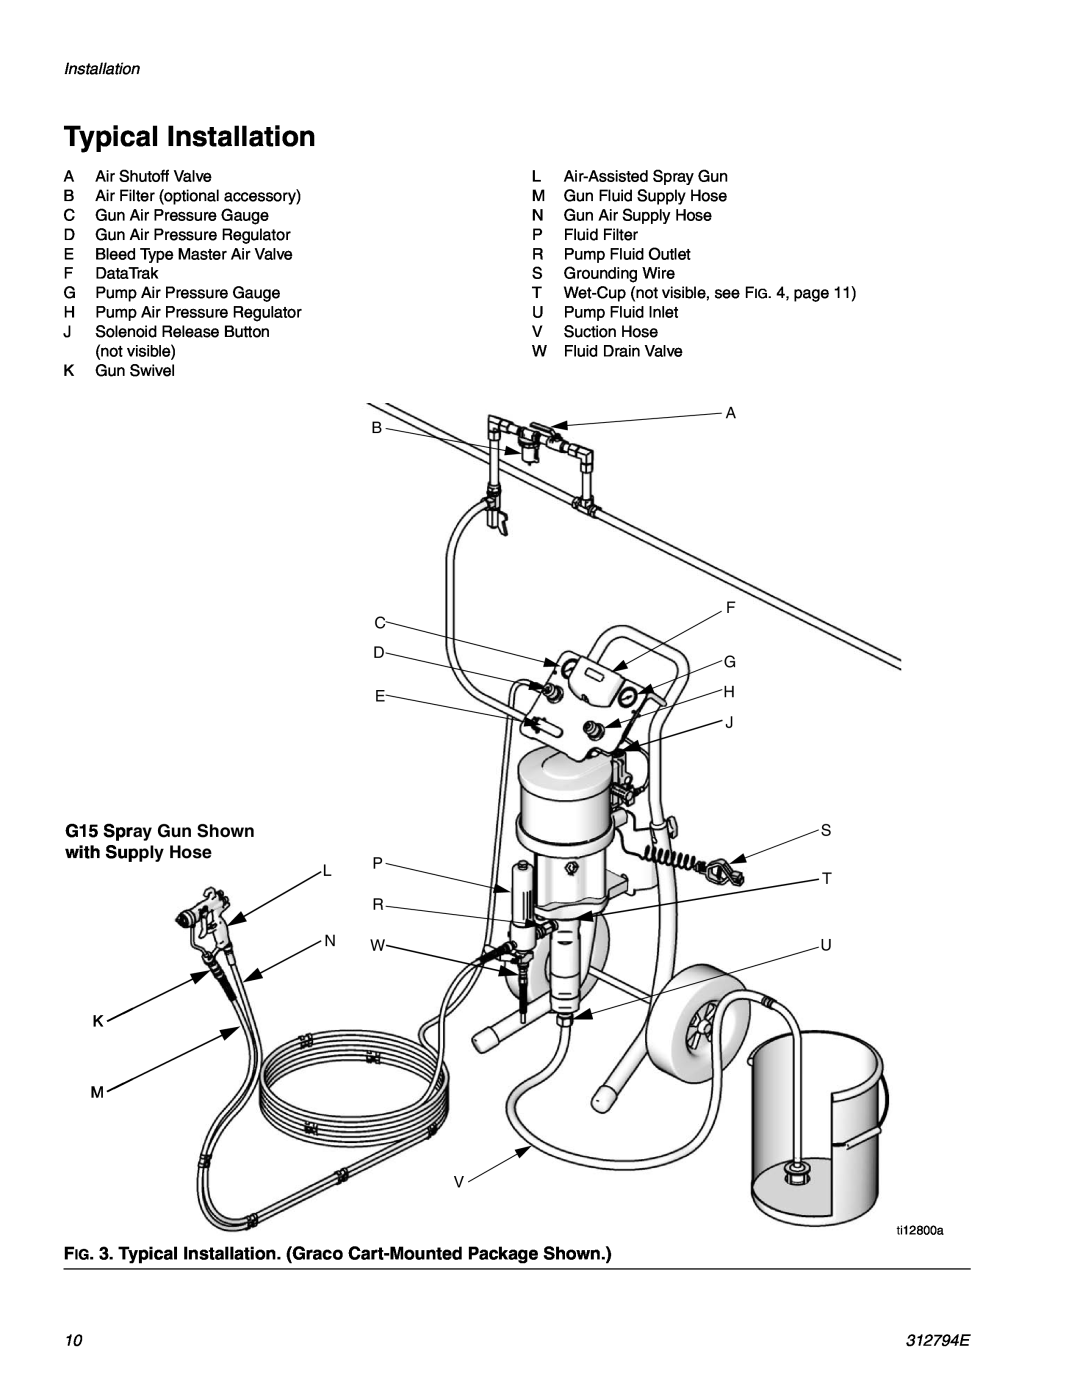 Graco 312794E important safety instructions Typical Installation, G15 Spray Gun Shown with Supply Hose 